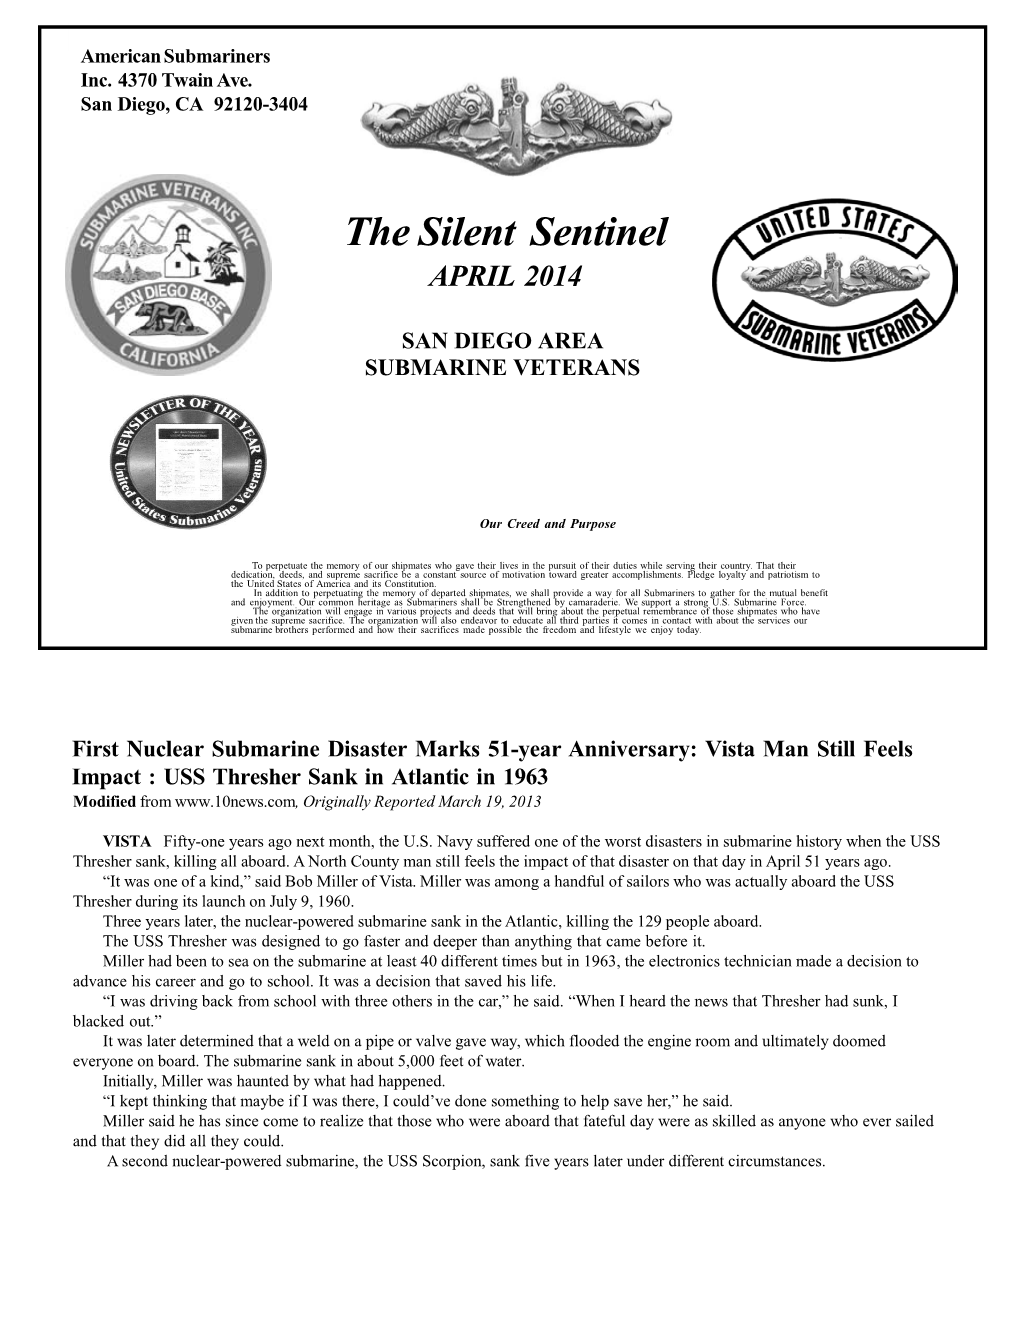 The Silent Sentinel, April 2014 Page 1 American Submariners Inc